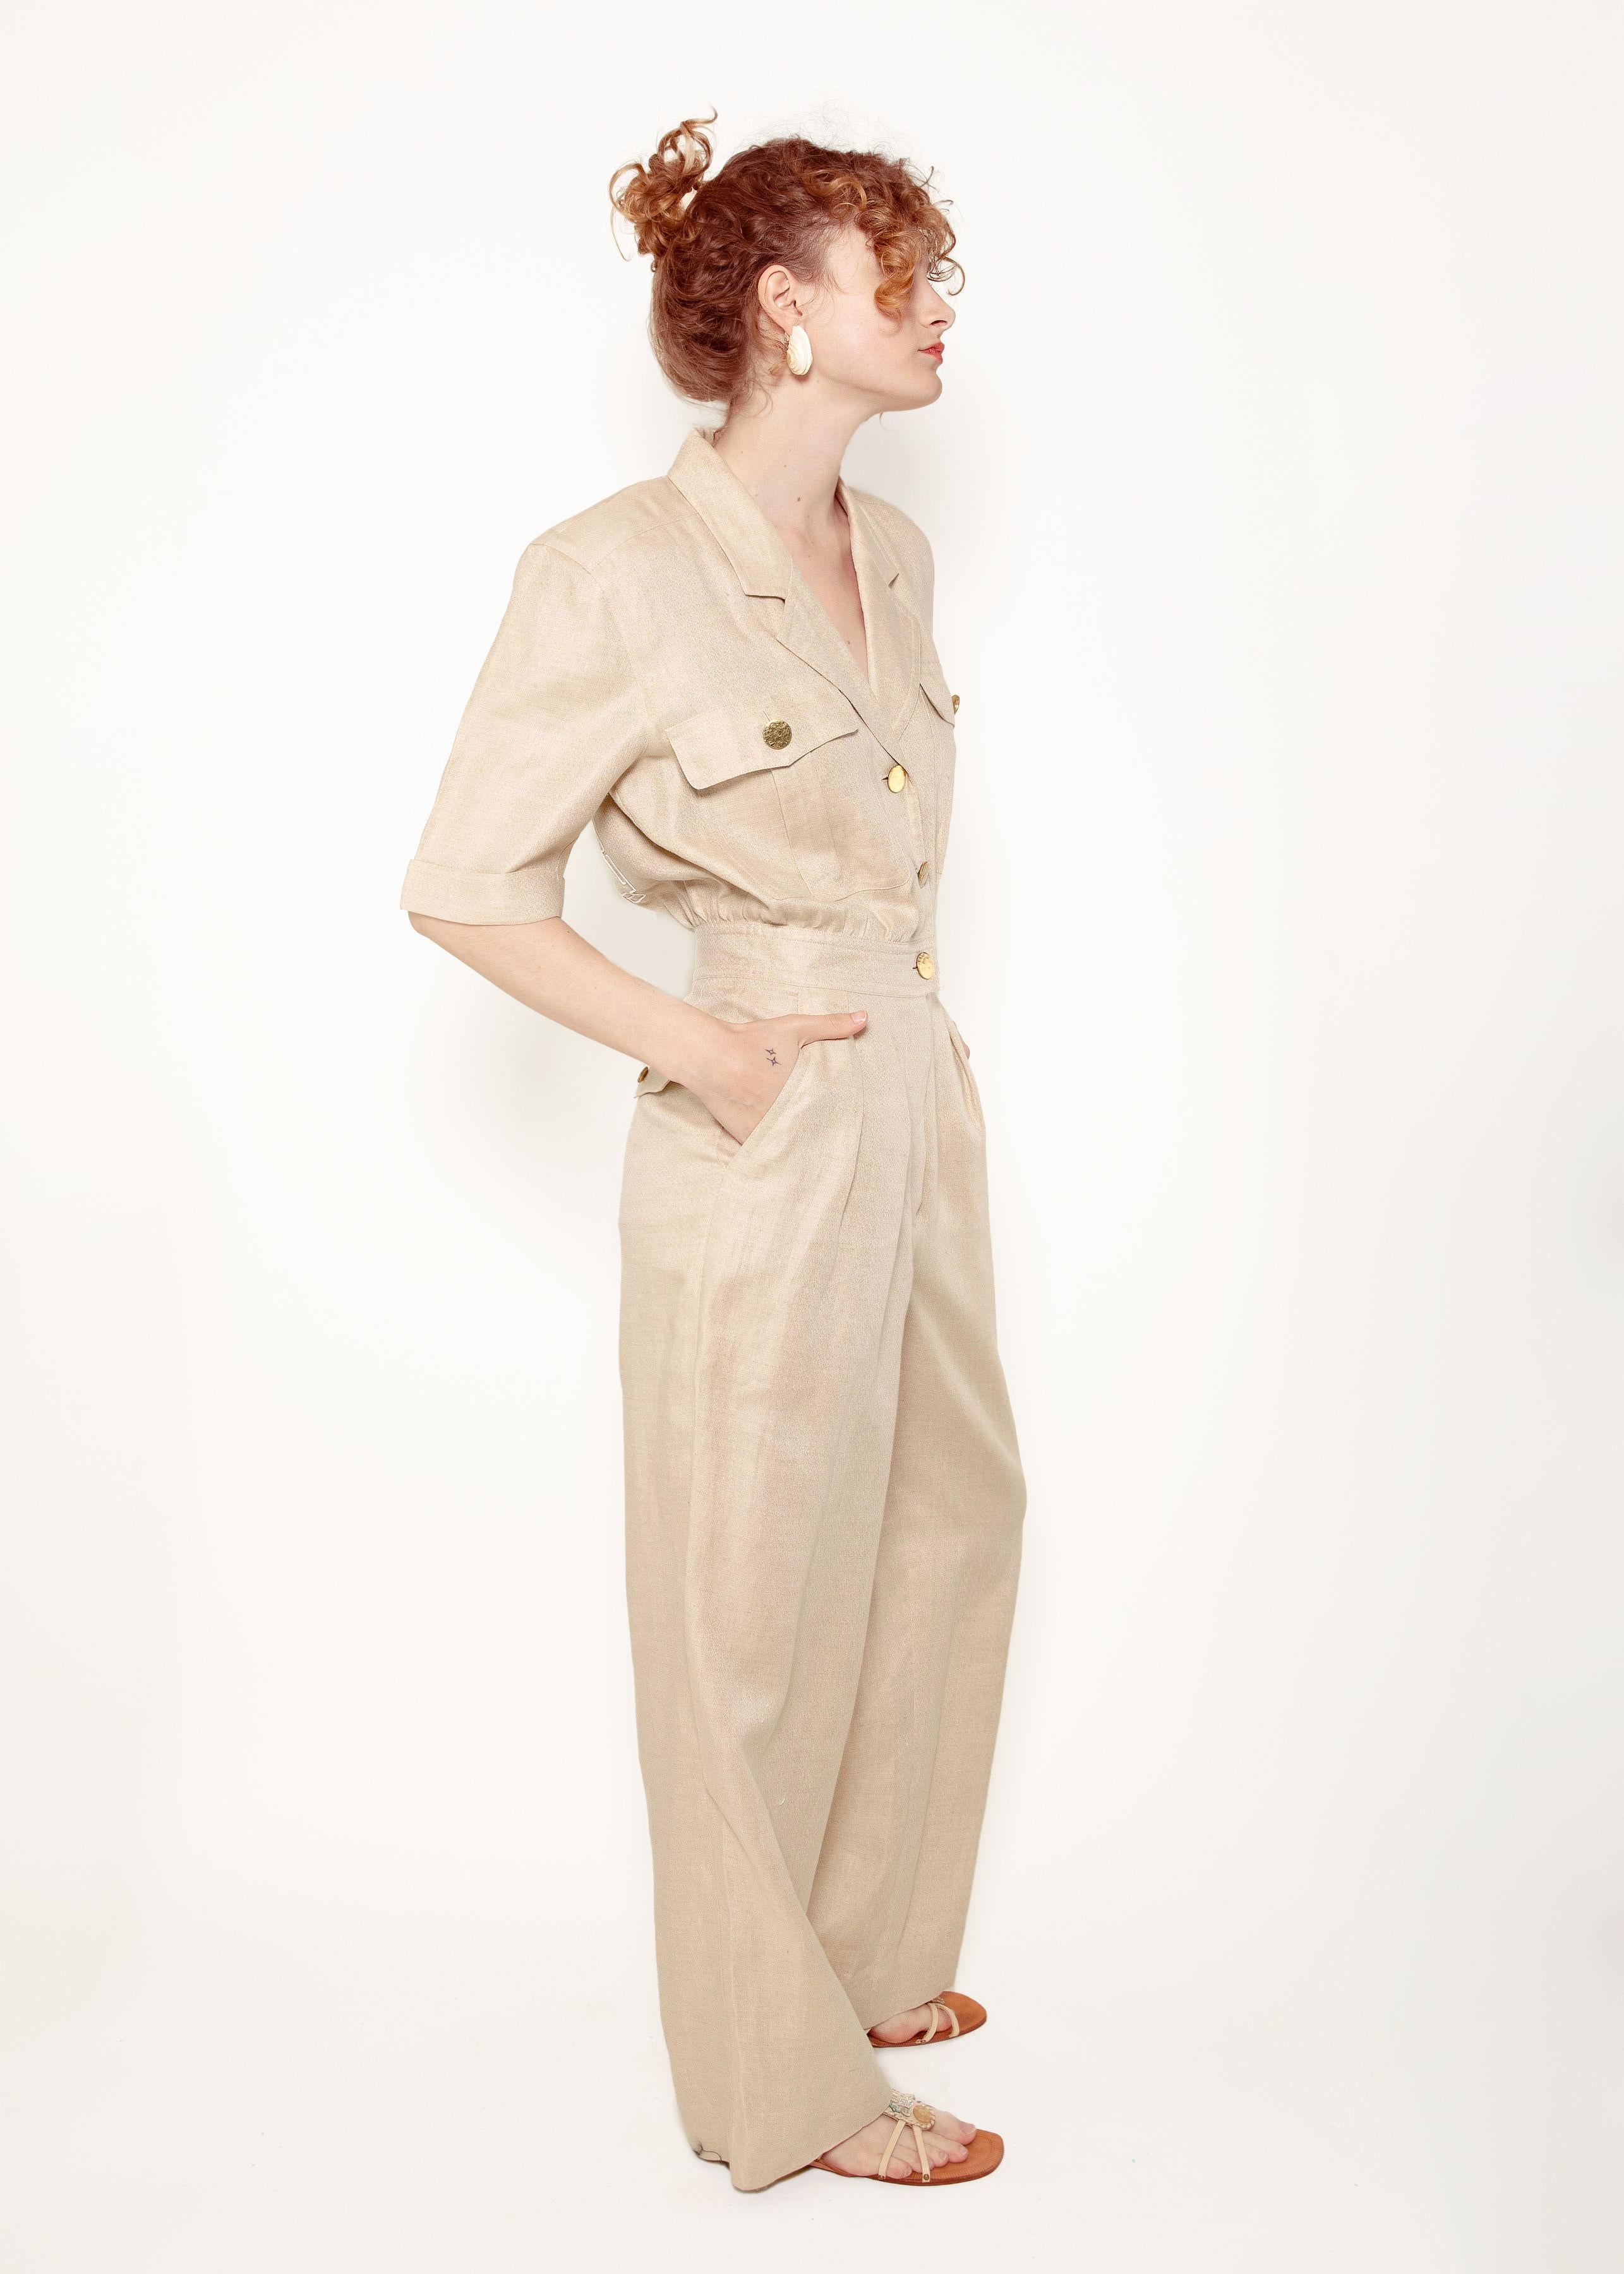 This Escada Linen Jumpsuit is perfect for a summer day. Made from lightweight sand colored linen, the jumpsuit features brass hammered buttons, front and side pockets, short sleeves, and a v neck with a collar. Stay cool and comfortable all season